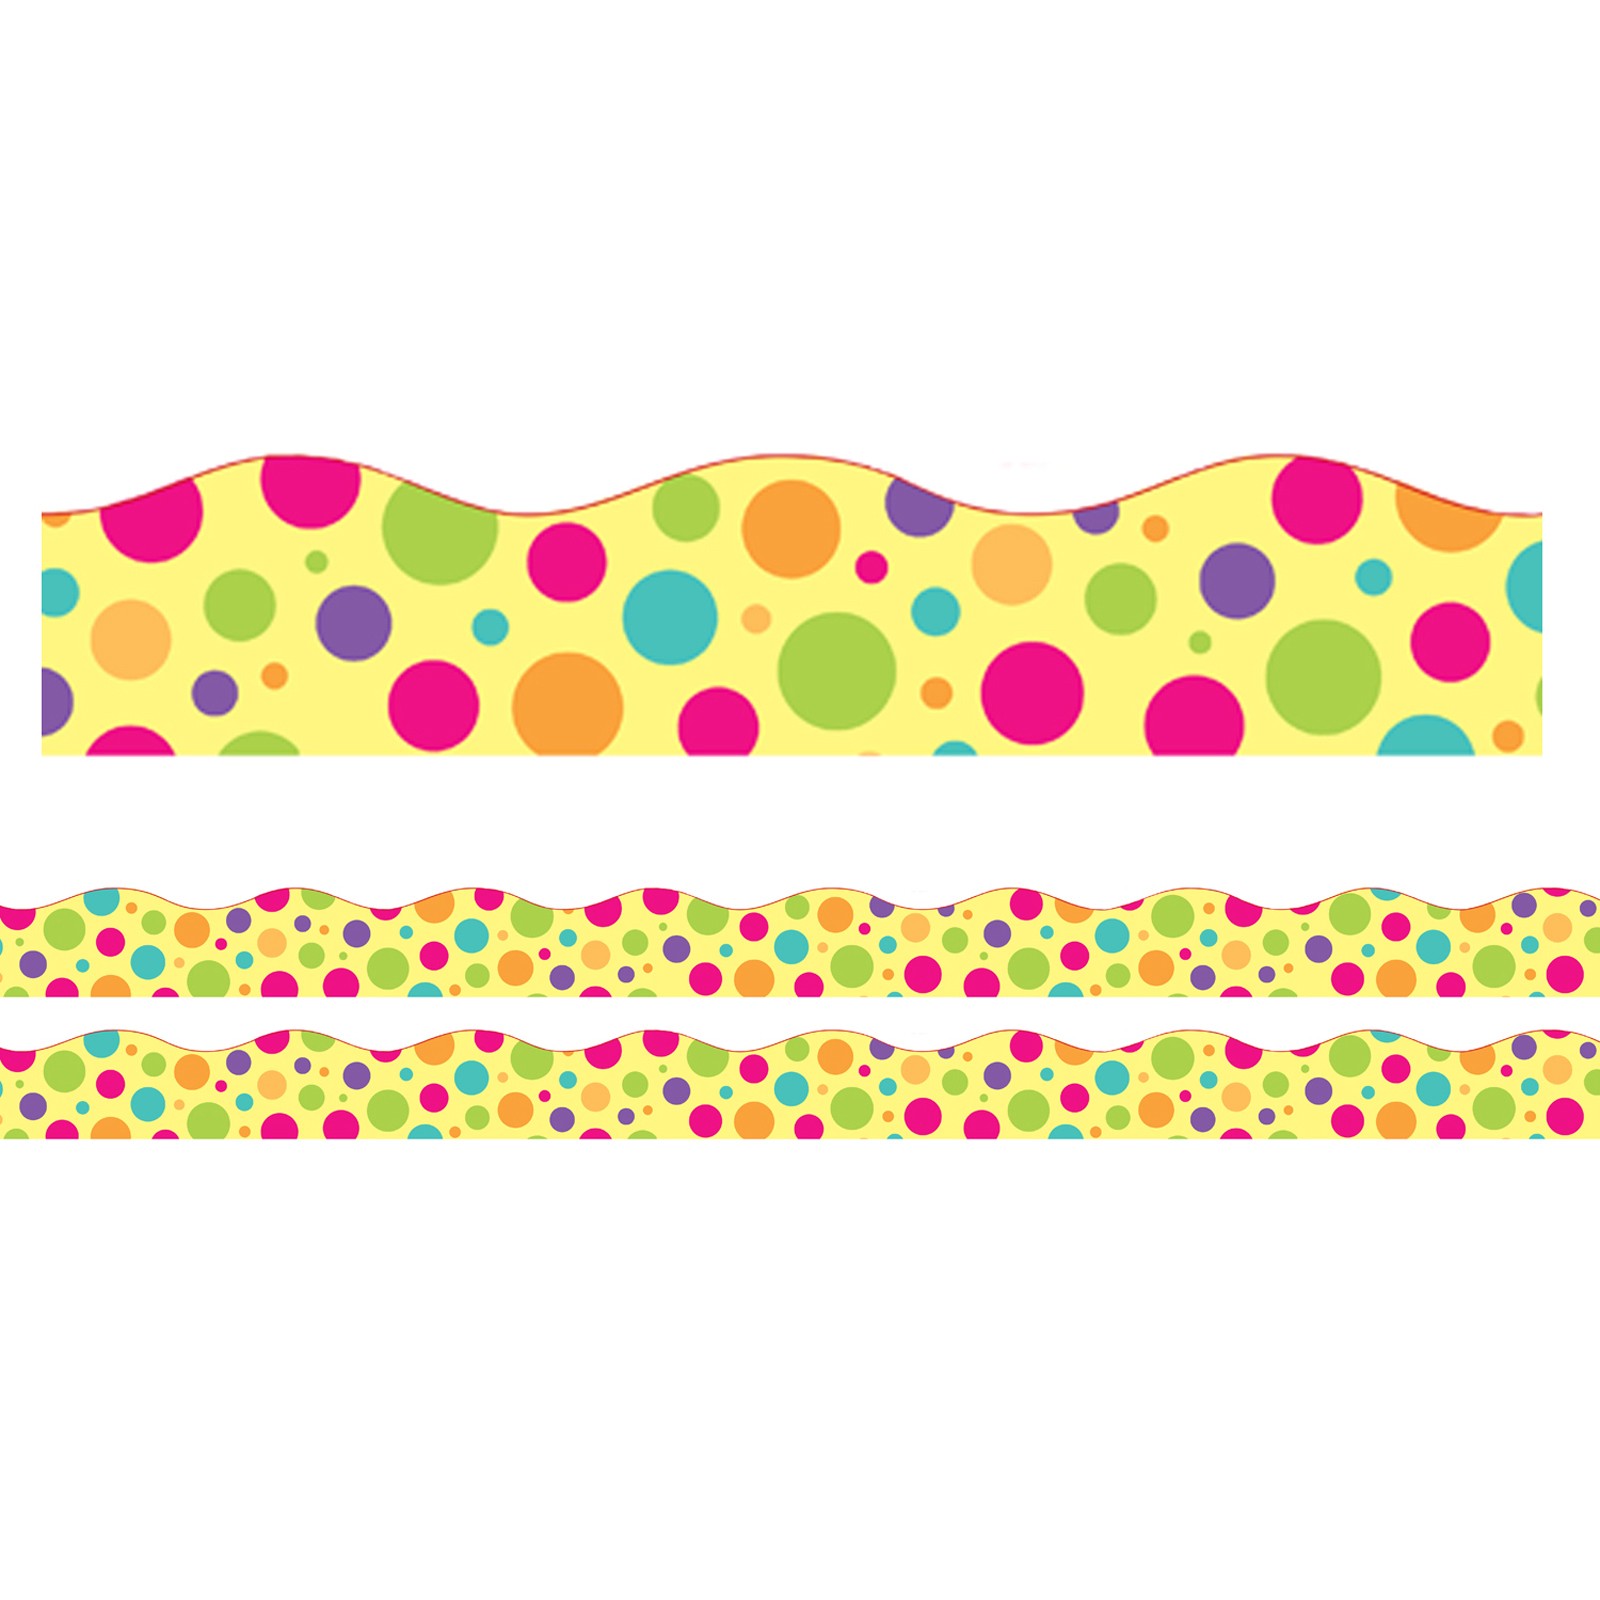 Borders/Trims, Magnetic, Scallop Cut - 1-1/2" x 24", Colorful Dot Theme, 24' per Pack, 2 Packs